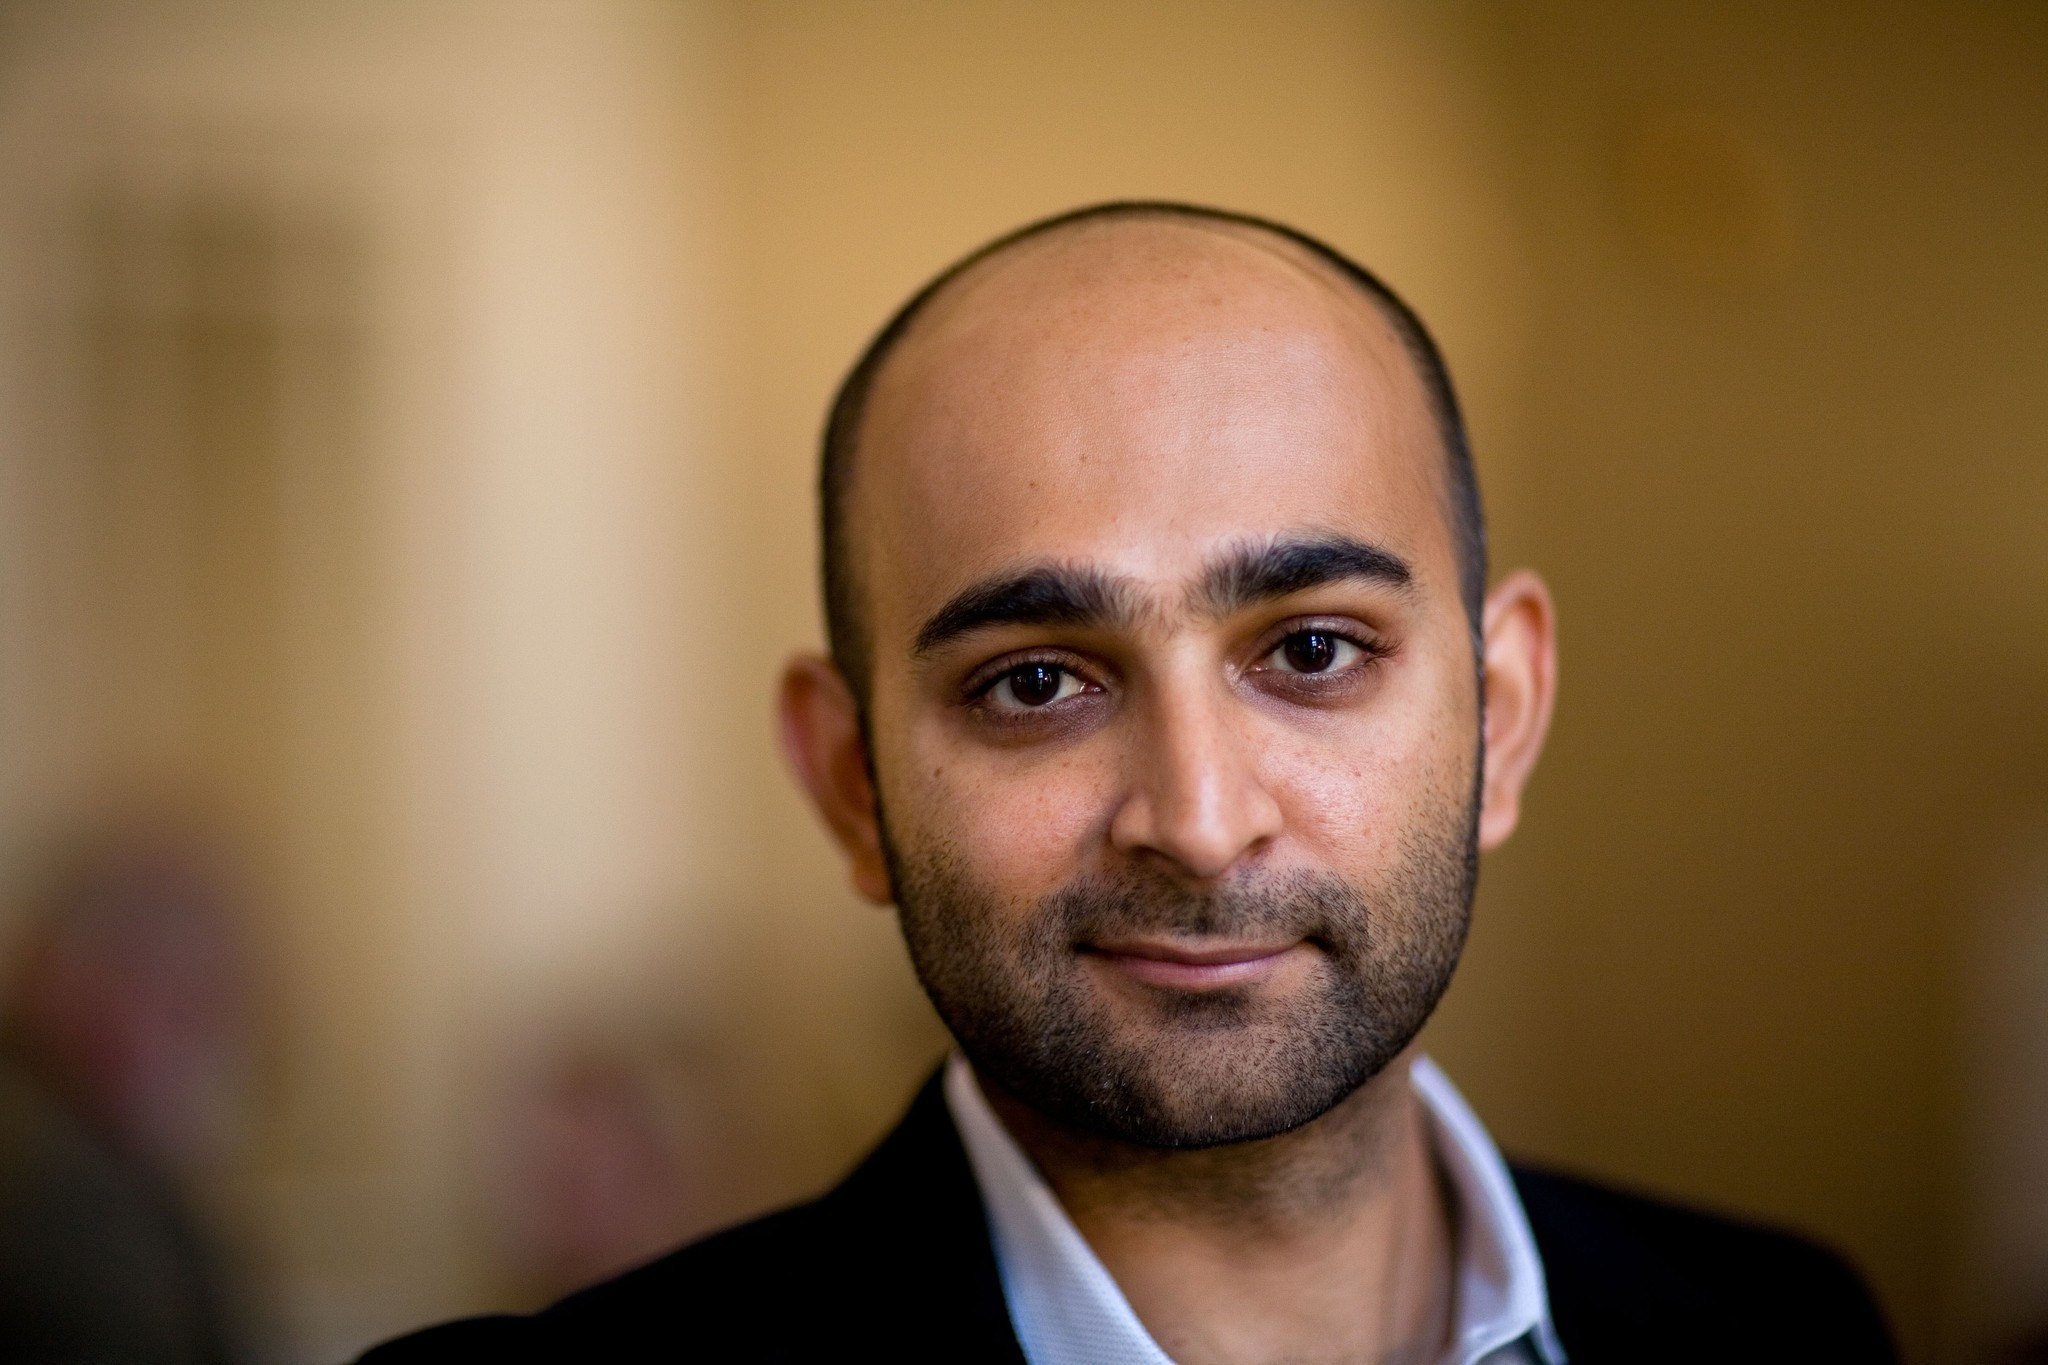 how to get filthy rich in rising asia by mohsin hamid